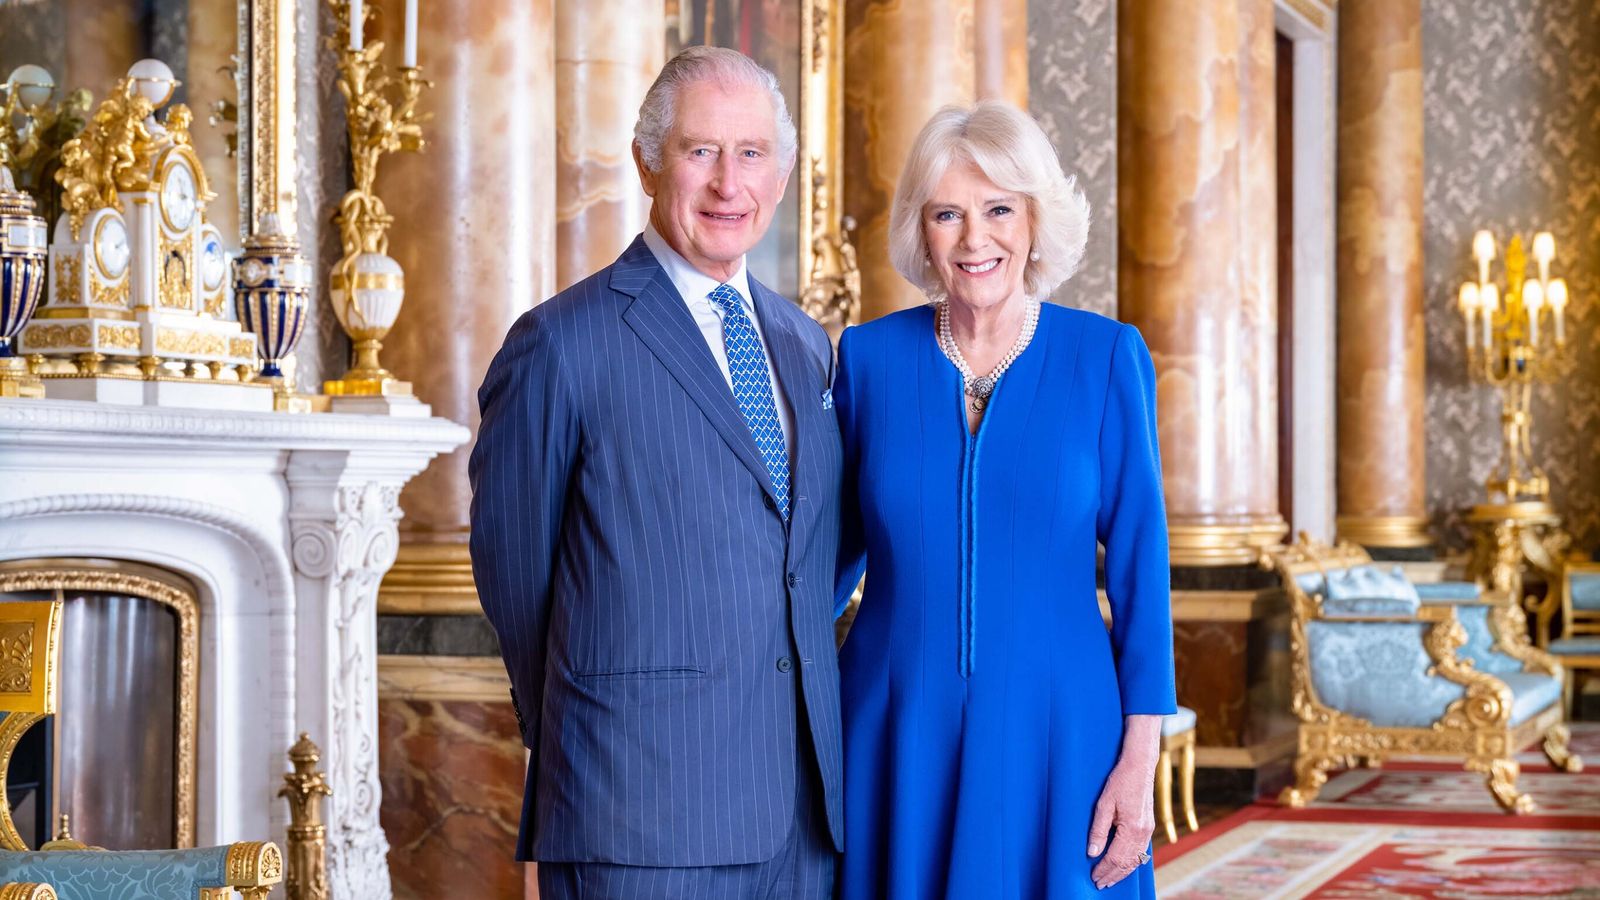 Coronation: New photos of King and Queen Consort released by Buckingham Palace